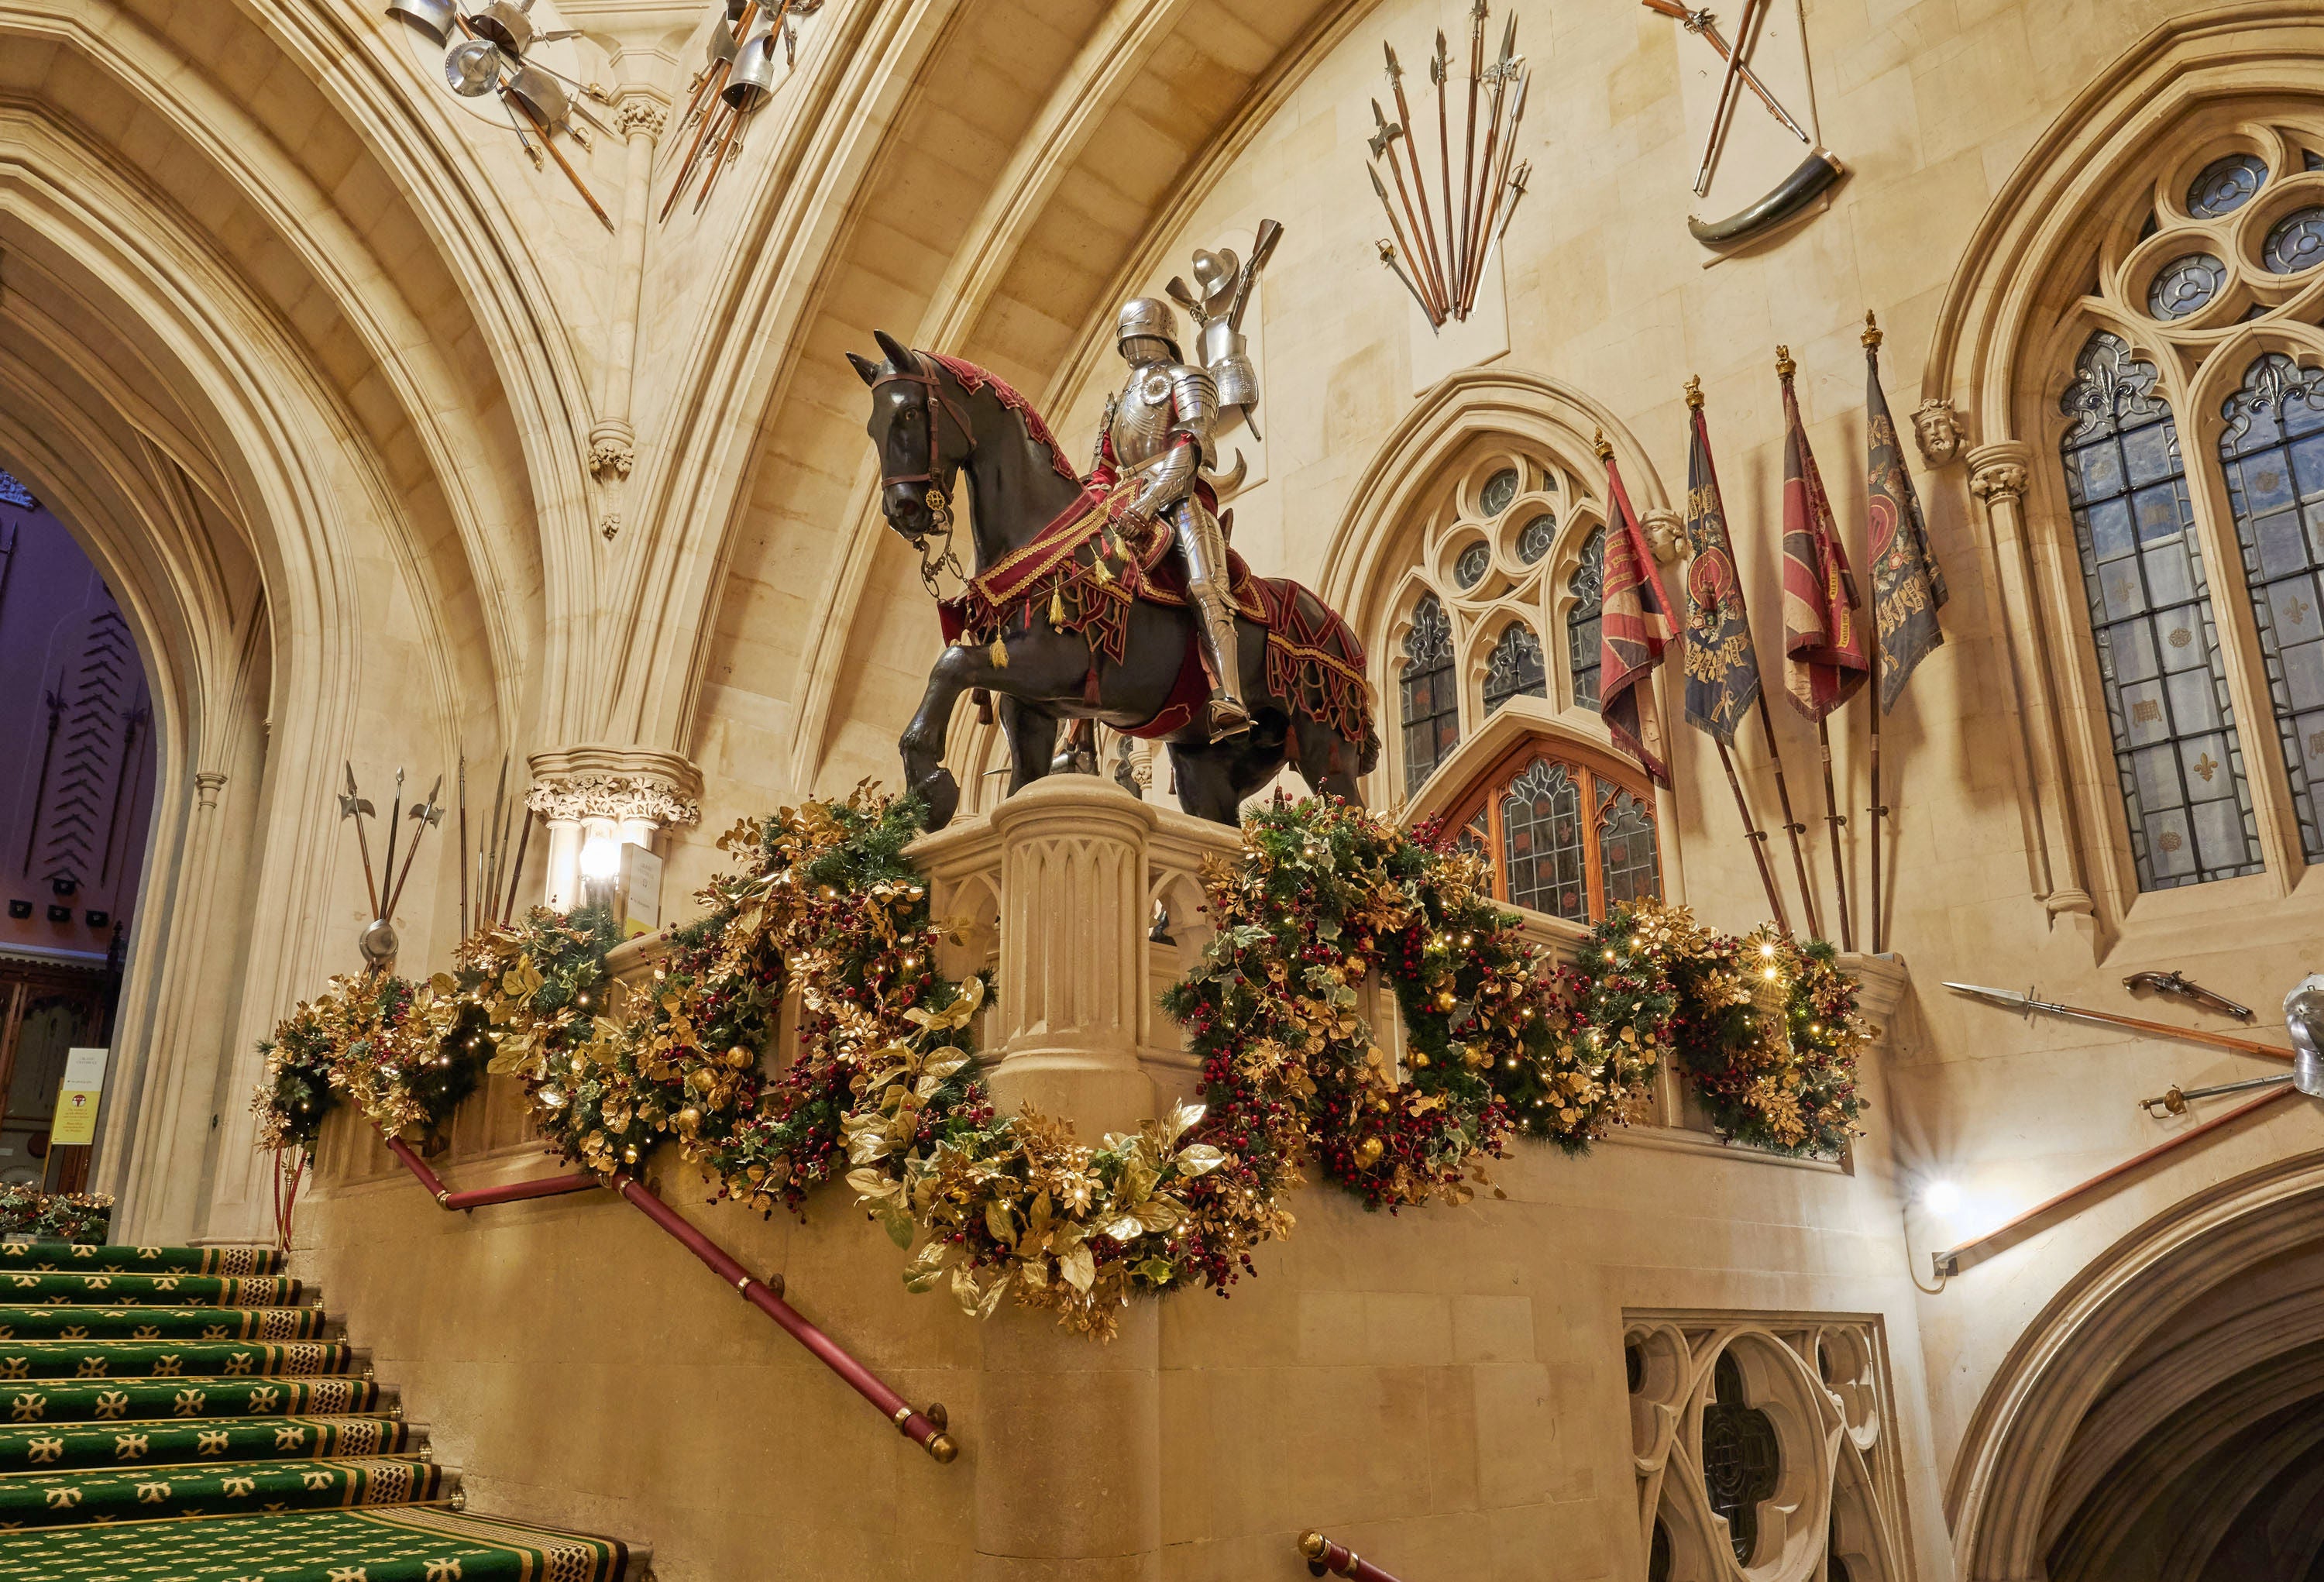 Festive garlands adorn the Grand Staircase at Windsor Castle